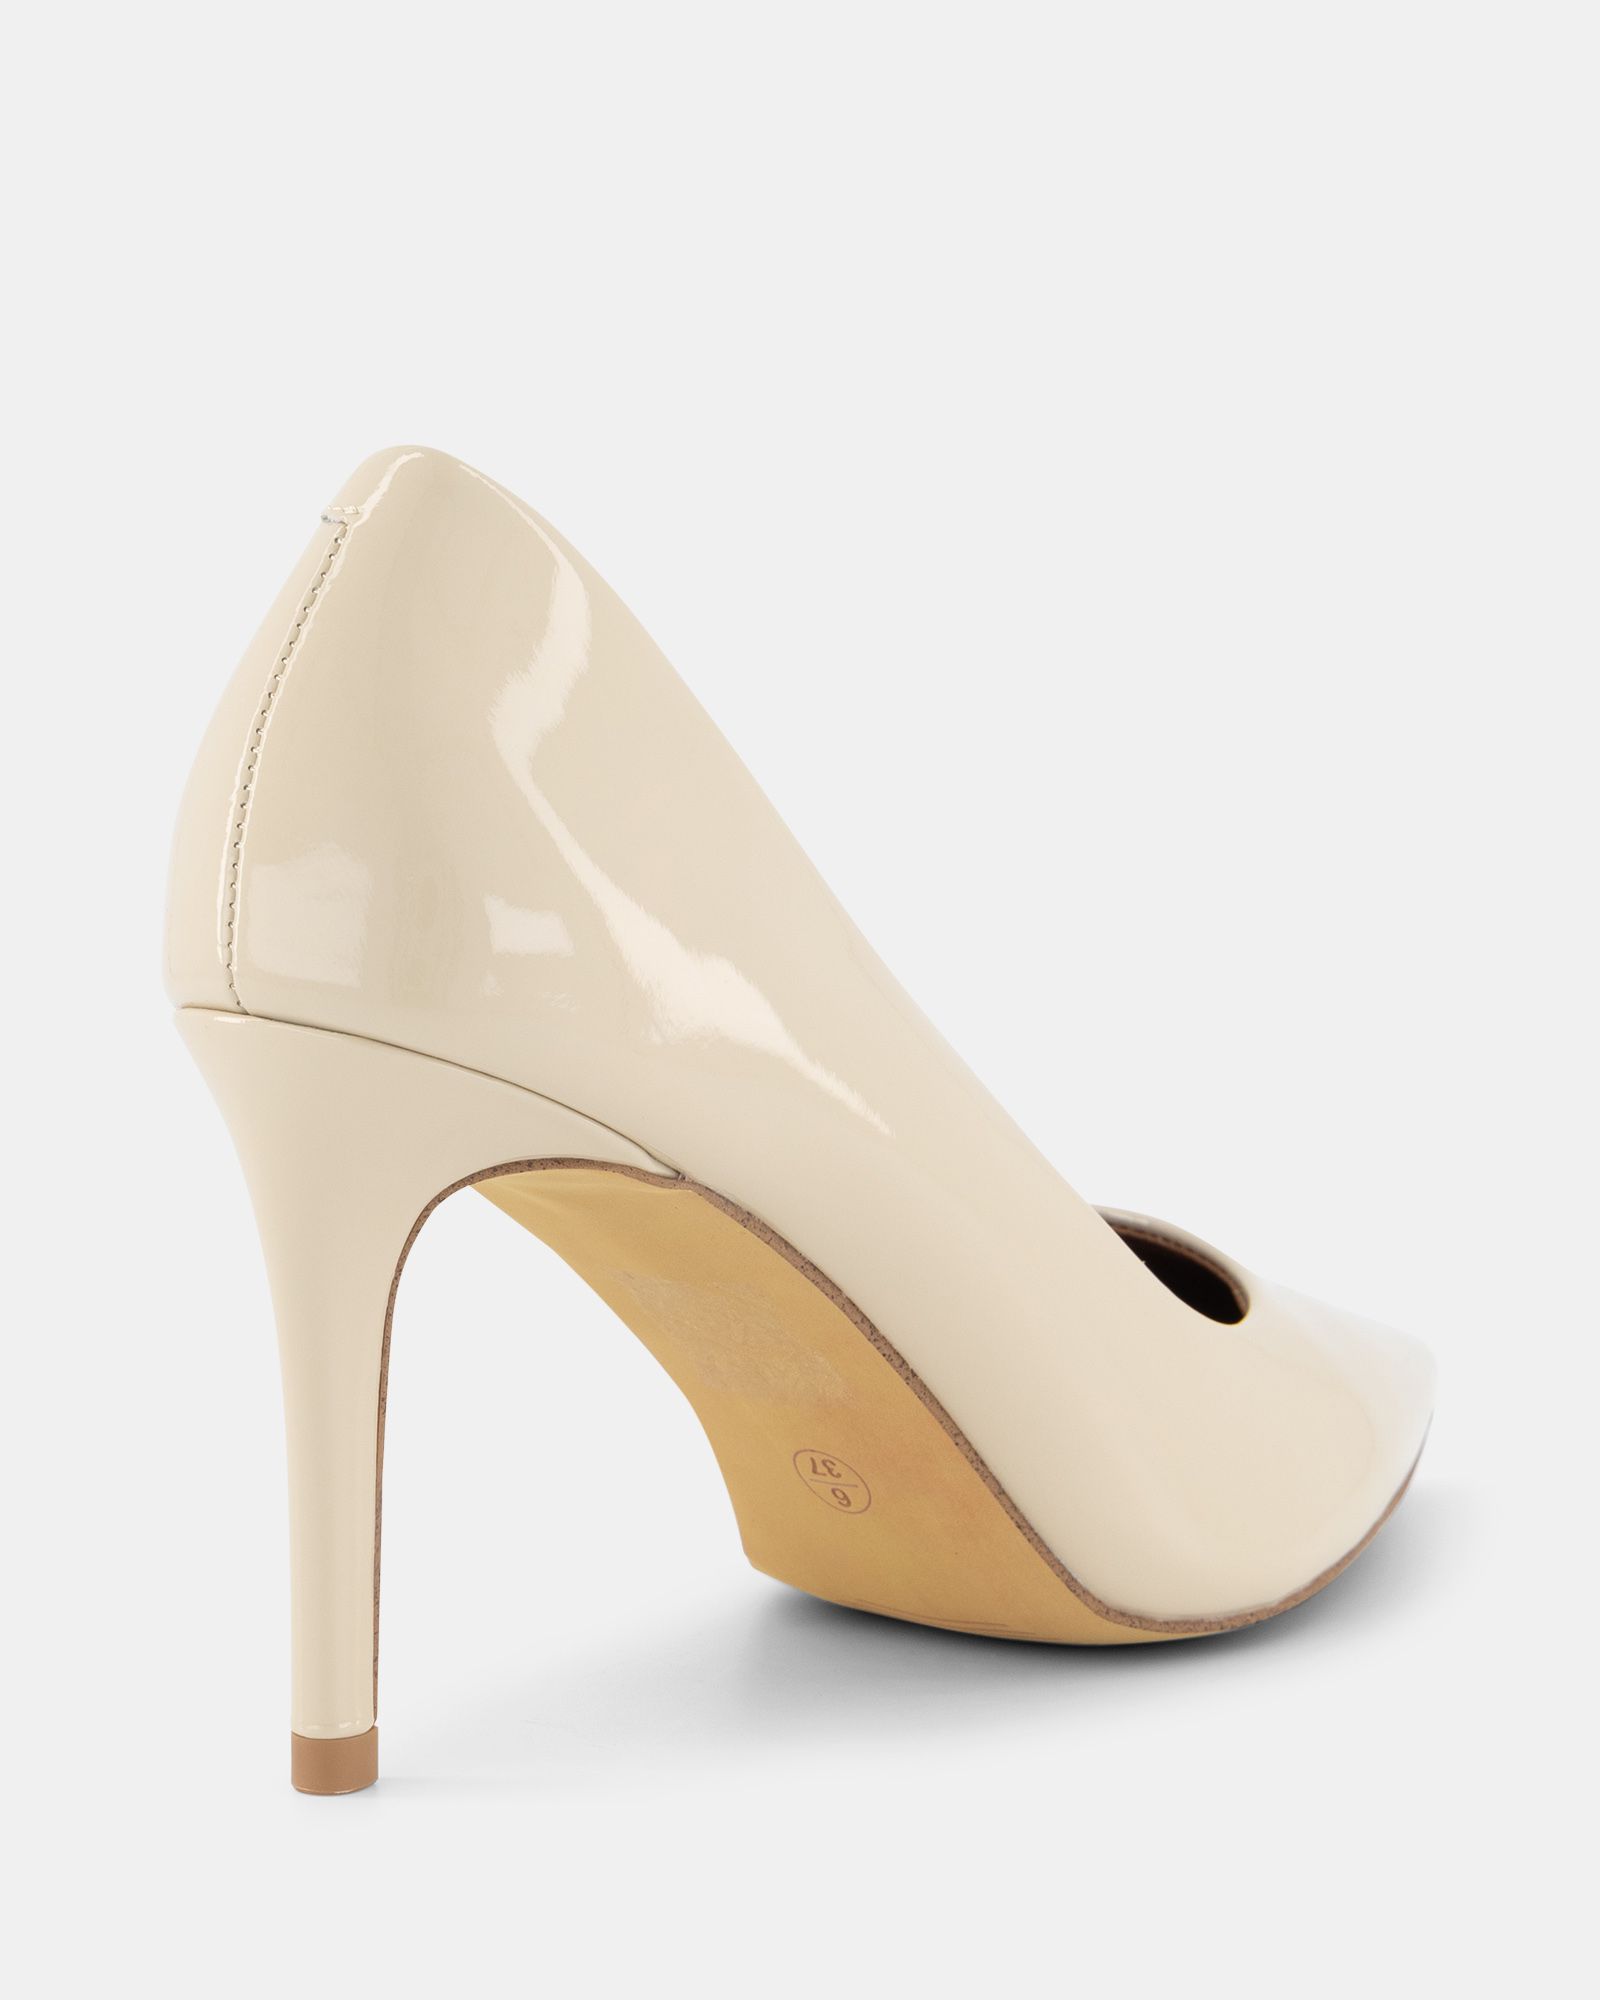 SHELLY SHEN Maggie Heels - Ivory Patent | Shoe Connection AU